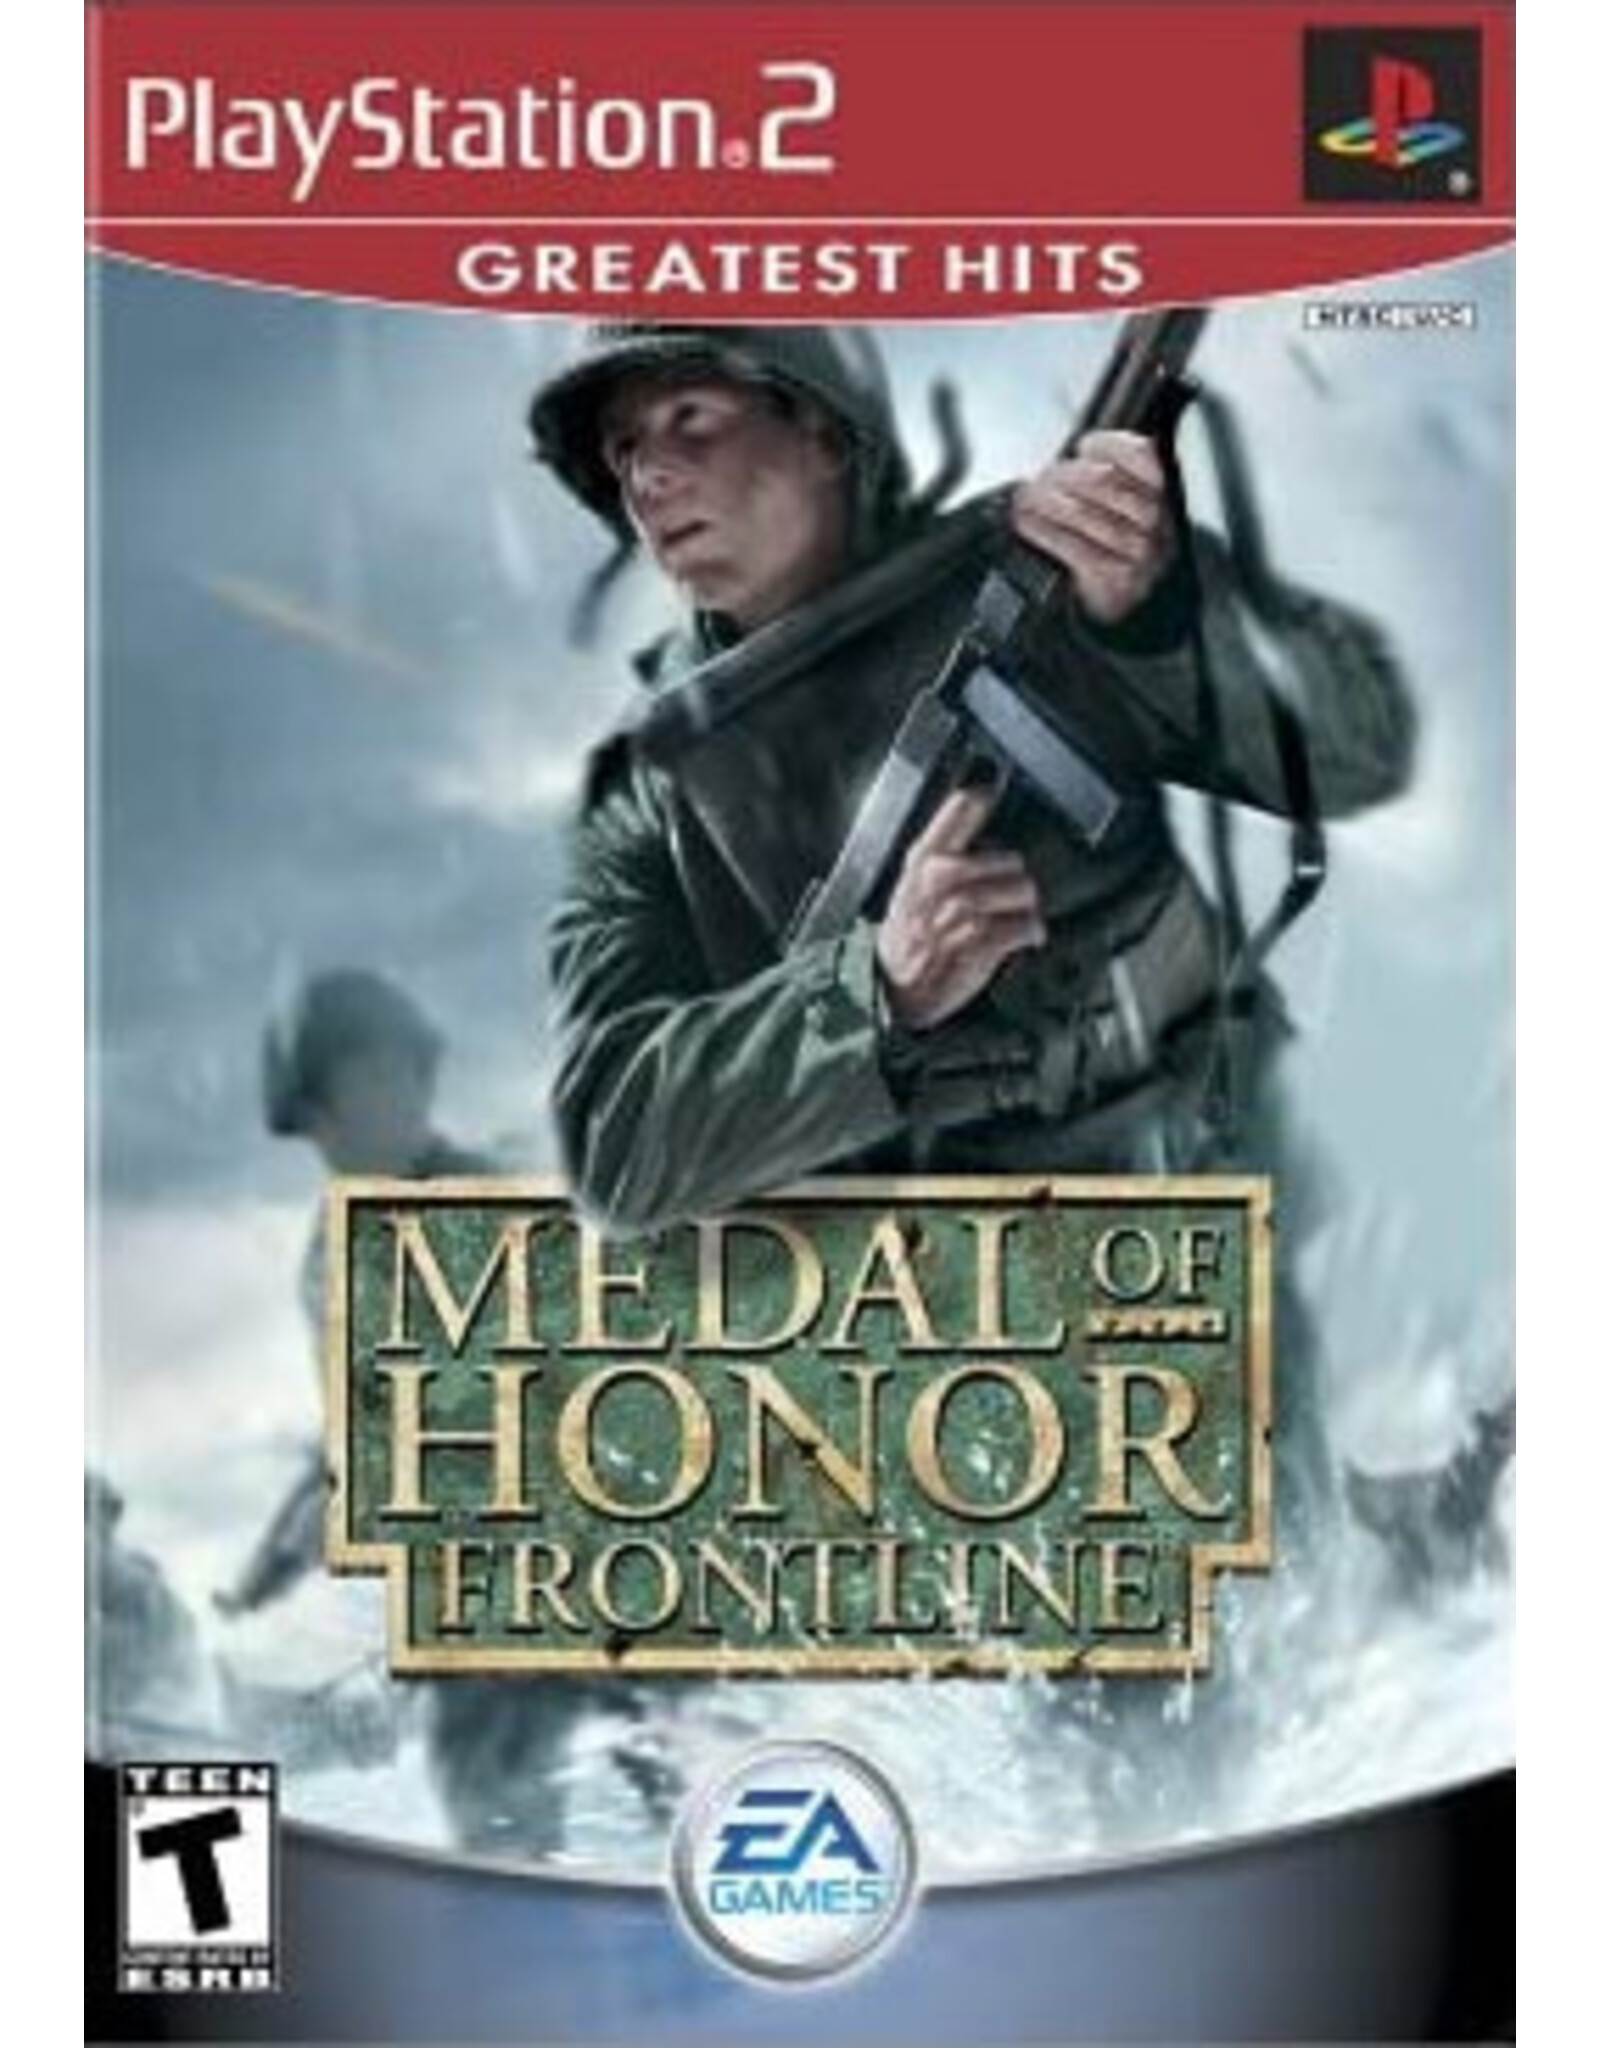 Playstation 2 Medal of Honor Frontline- Greatest Hits (Used)